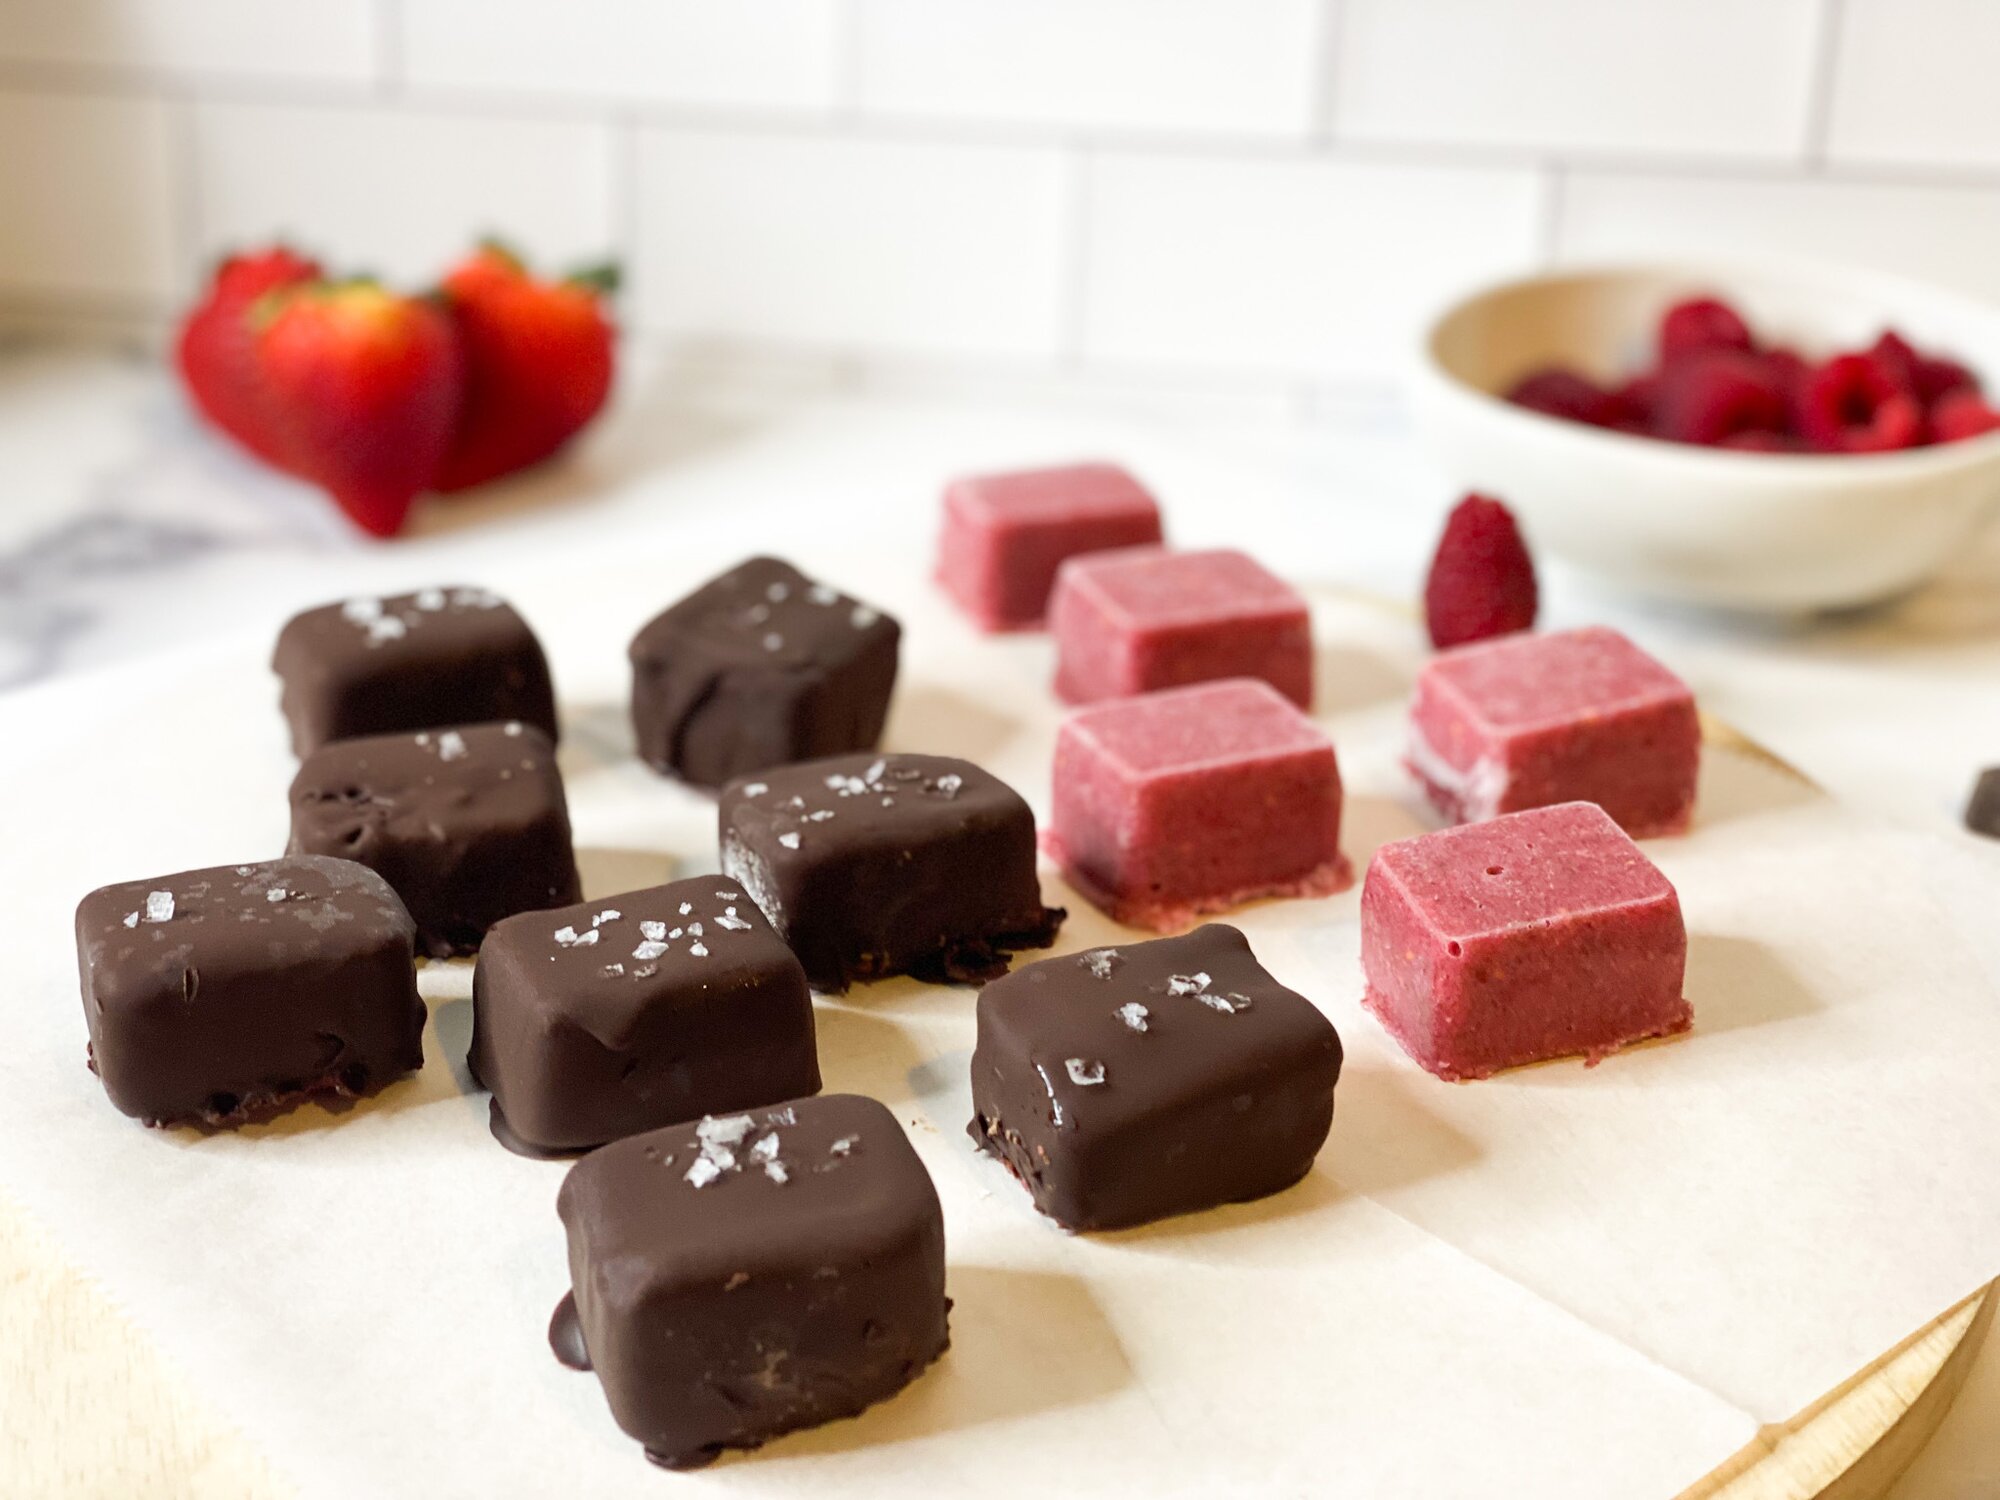 Berry Collagen bites on a wooden board, half covered in chocolate, half plain